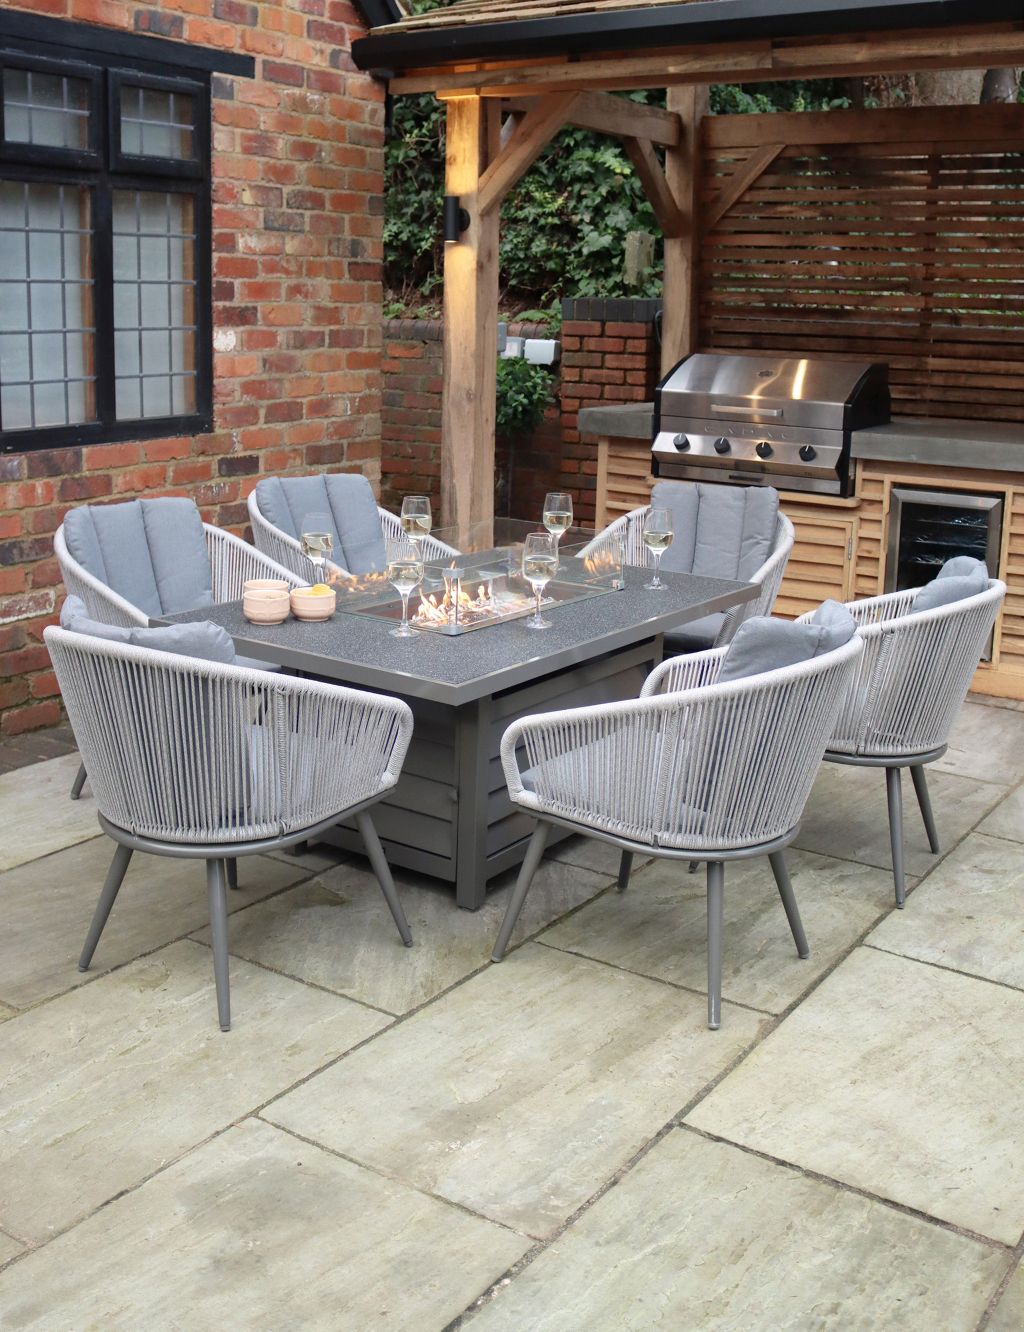 Aspen 6 Seater Garden Fire Pit Table & Chairs